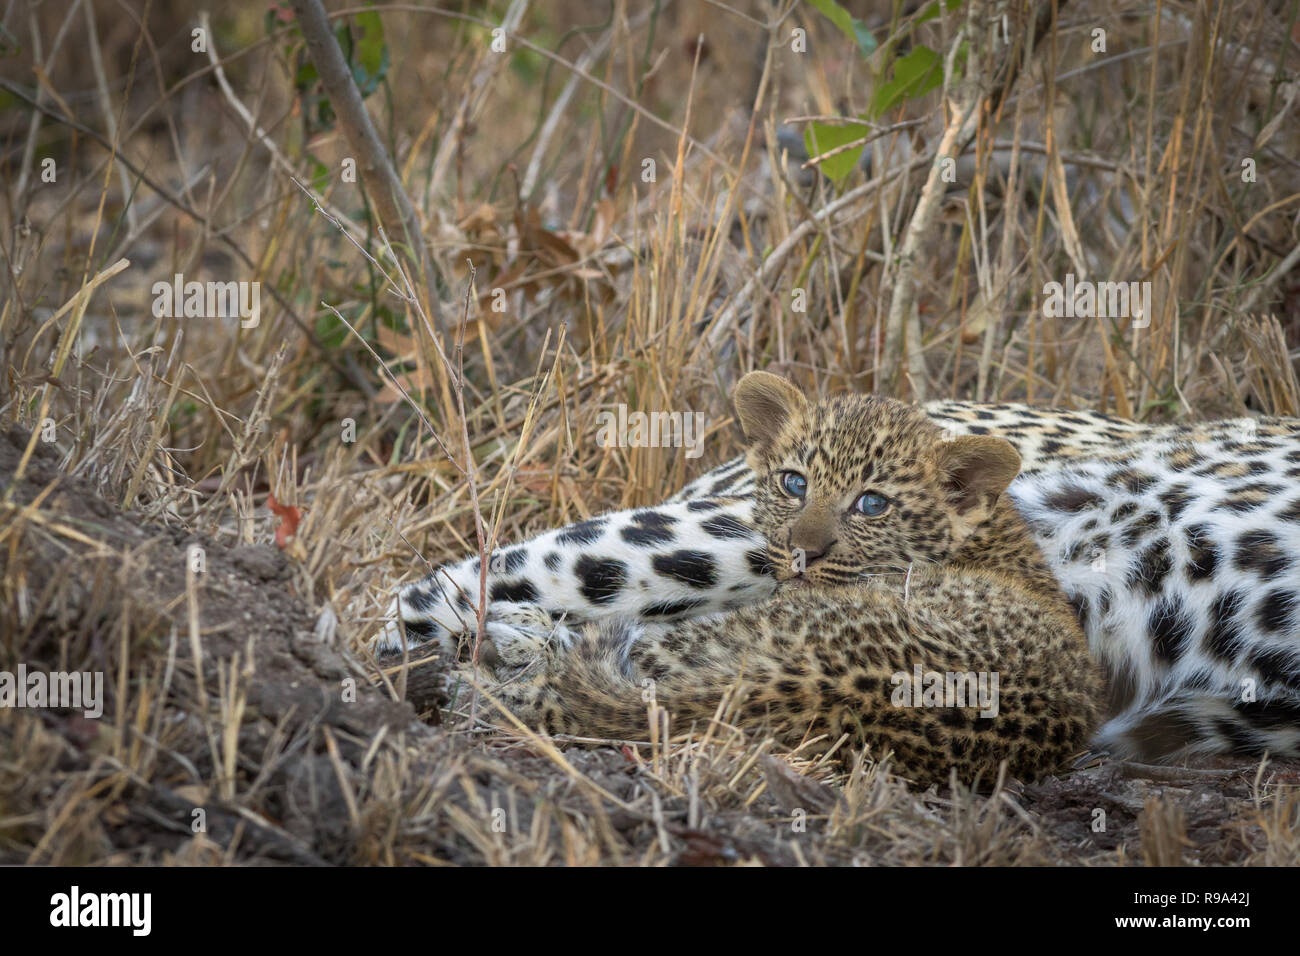 Adorable tiny leopard cub laying next to mom. Stock Photo